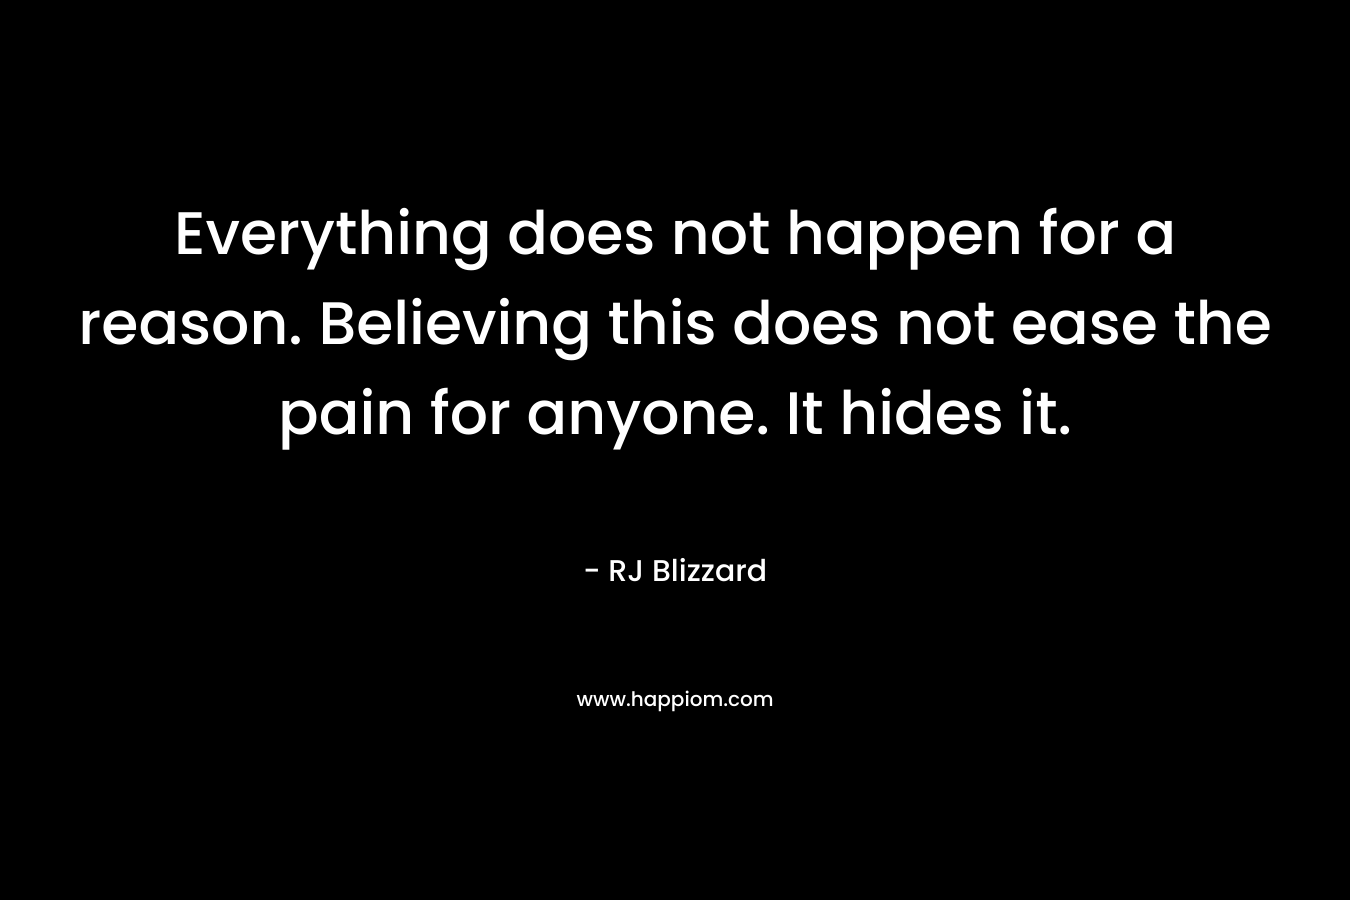 Everything does not happen for a reason. Believing this does not ease the pain for anyone. It hides it. – RJ Blizzard